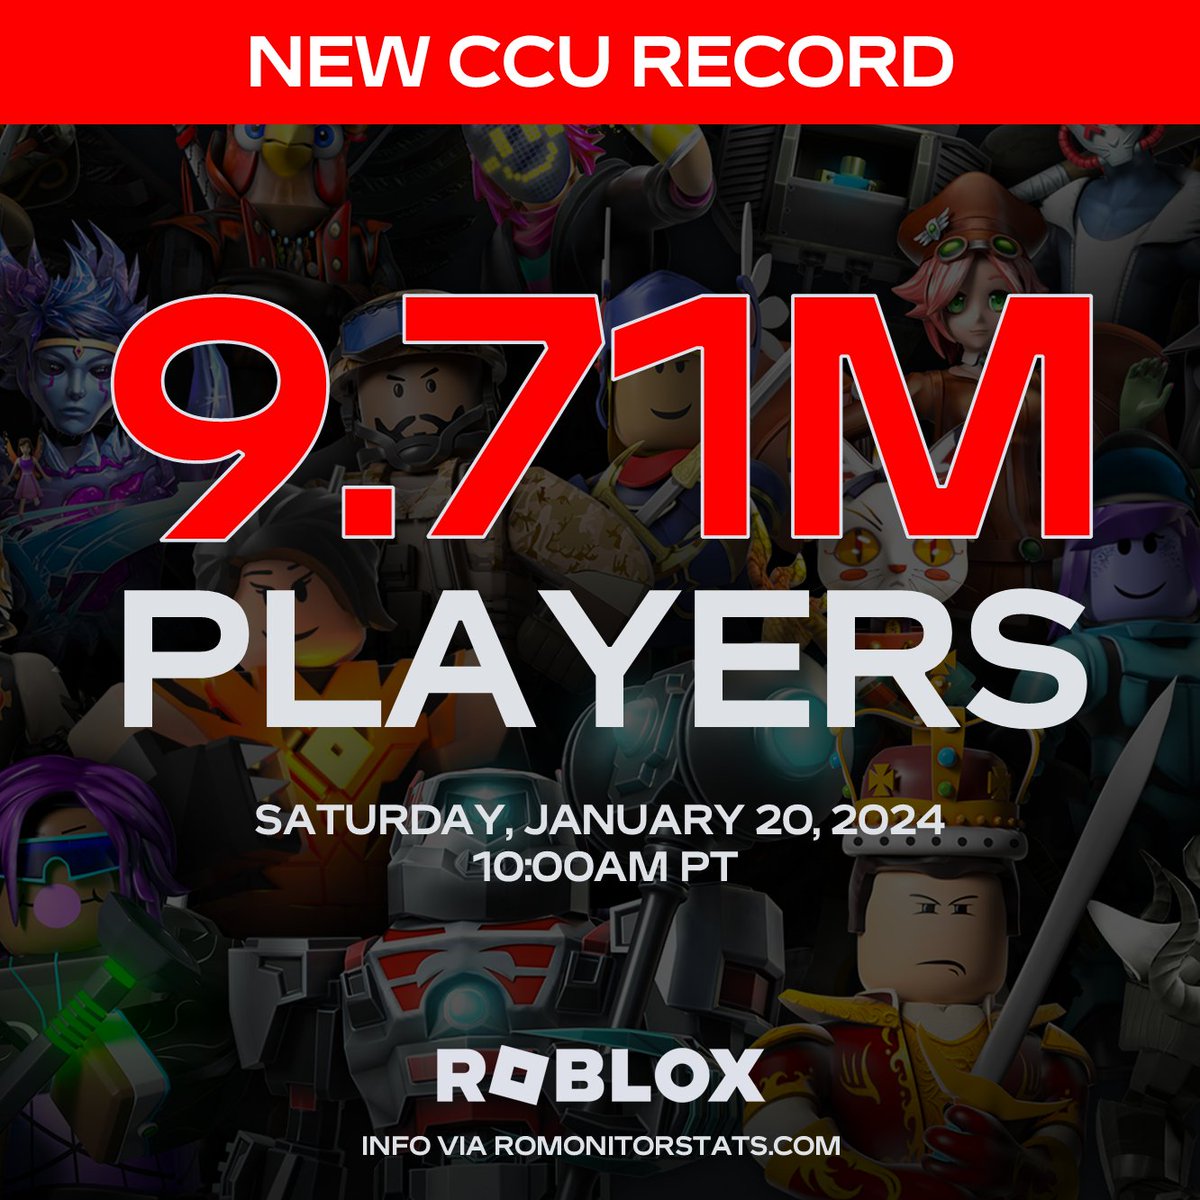 Roblox achieved a new peak concurrent player count today, reaching 9,714,443 users online at the same time!